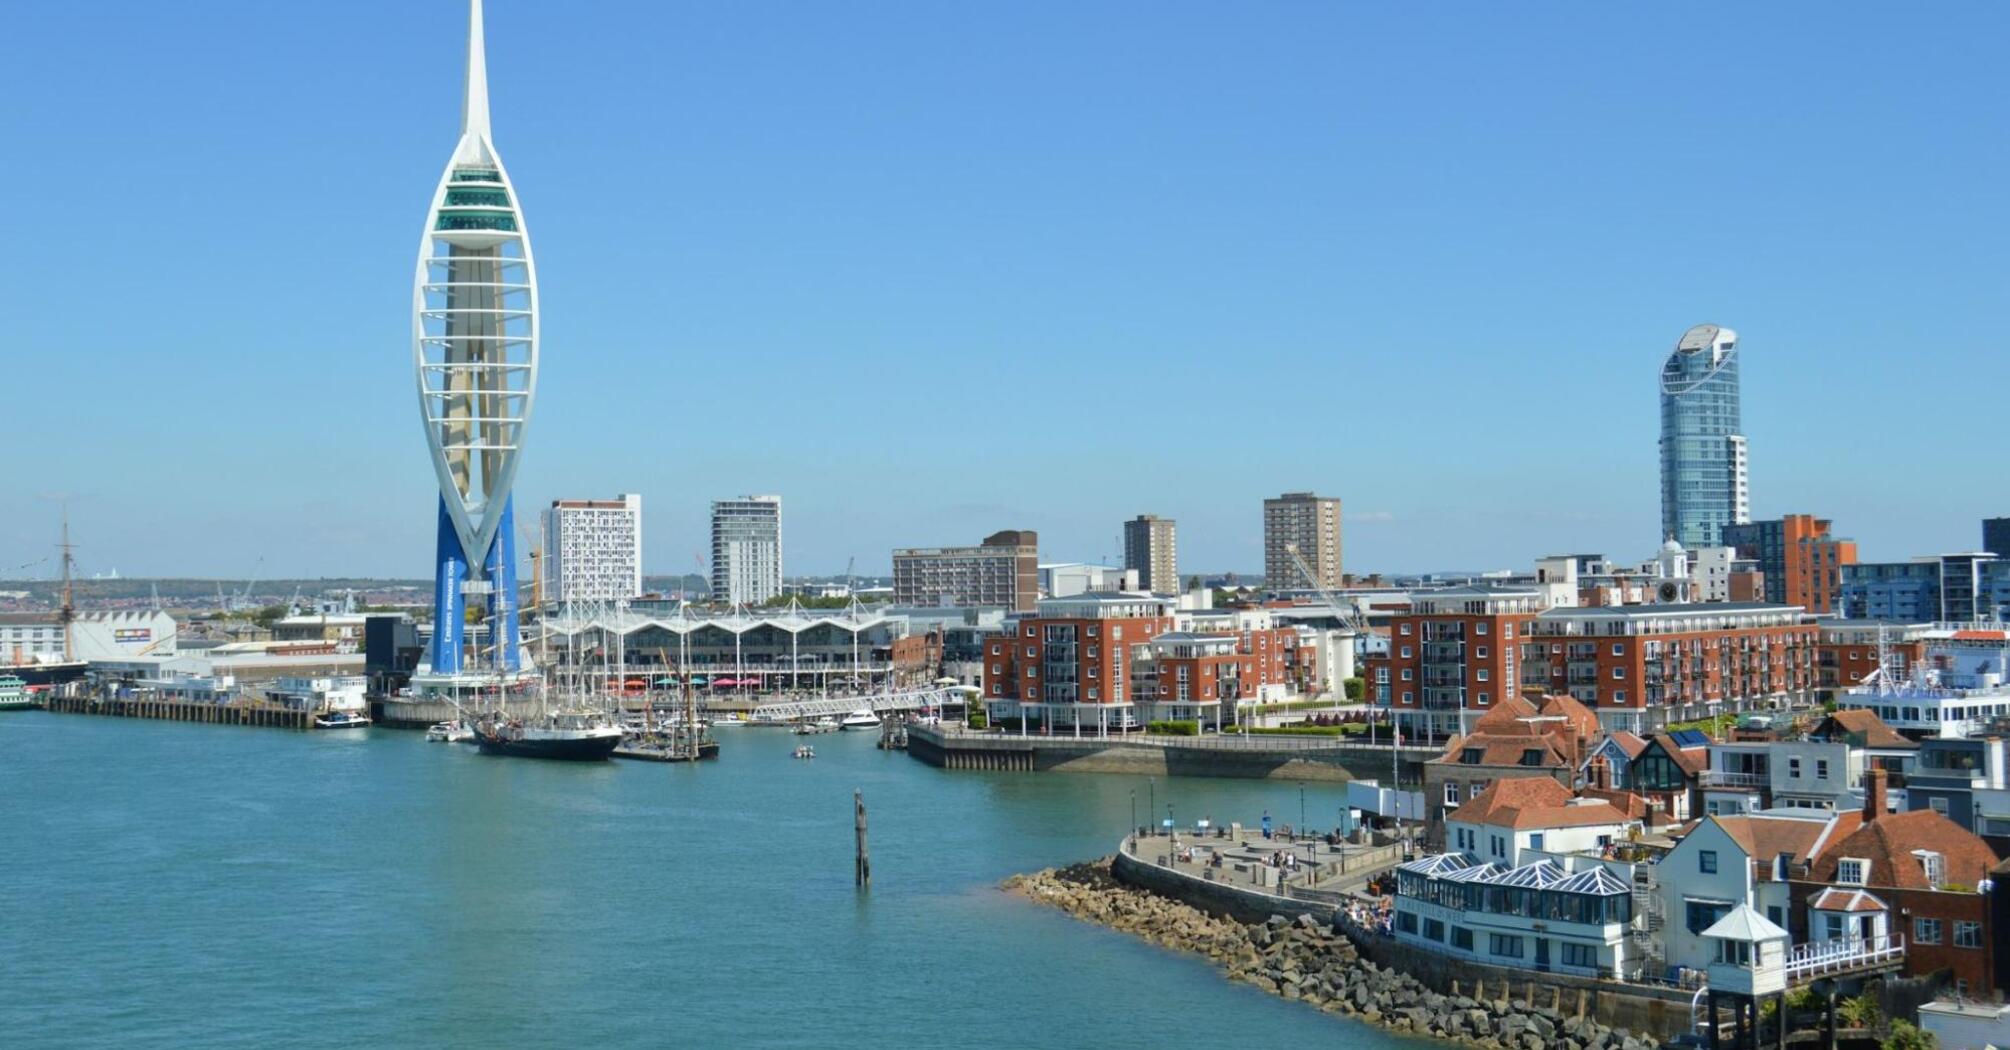 Skyline of Portsmouth featuring Spinnaker Tower and harbor